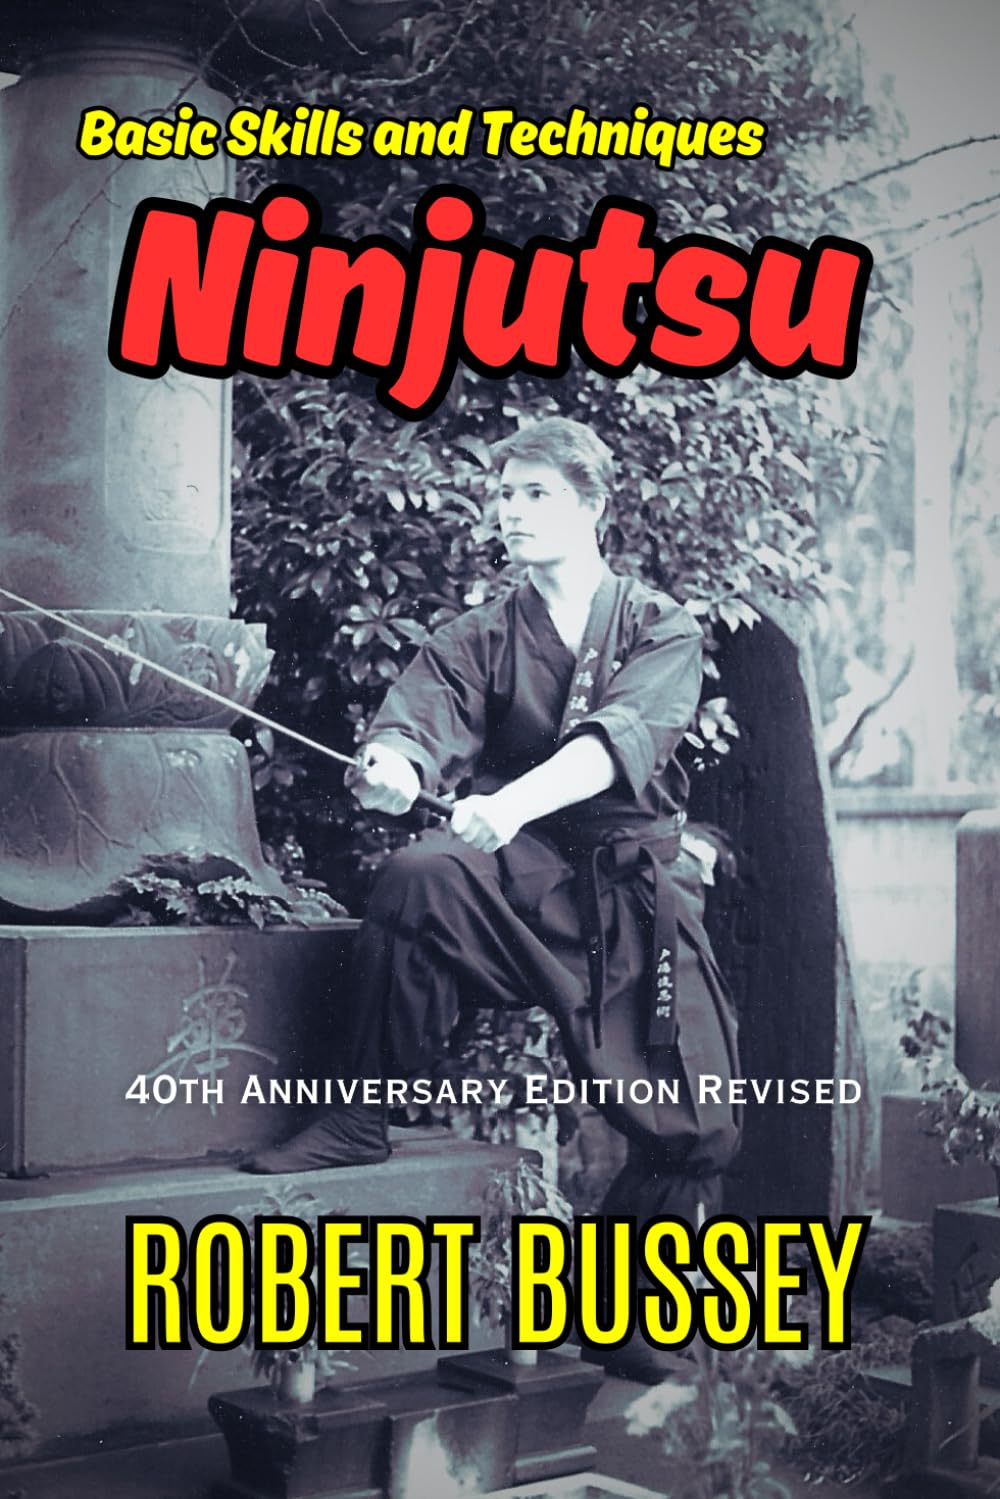 Ninjutsu Basic Skills & Techniques Book by Robert Bussey (Revised Edition)